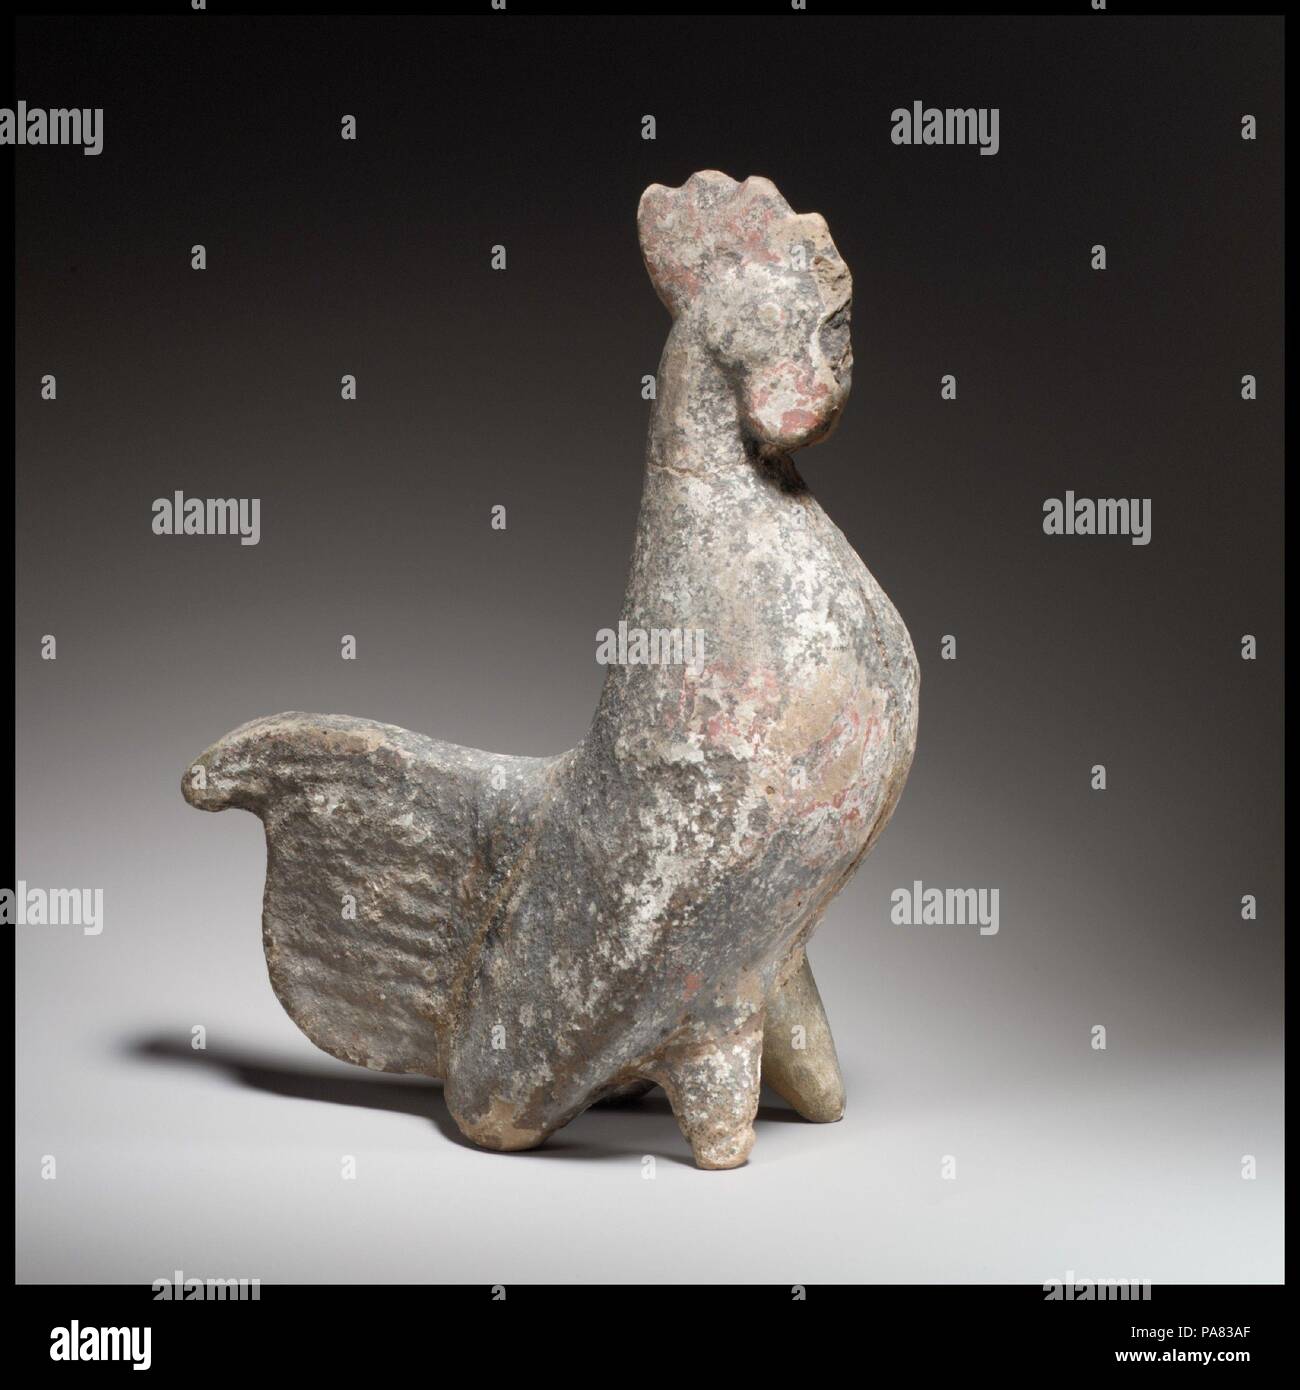 Rooster figurine. Culture: Cypriot. Dimensions: H. 8 9/16 in. (21.7 cm). Date: early 5th century B.C..  The figurine is mold-made in two molds and is hollow. The feet are handmade. Museum: Metropolitan Museum of Art, New York, USA. Stock Photo